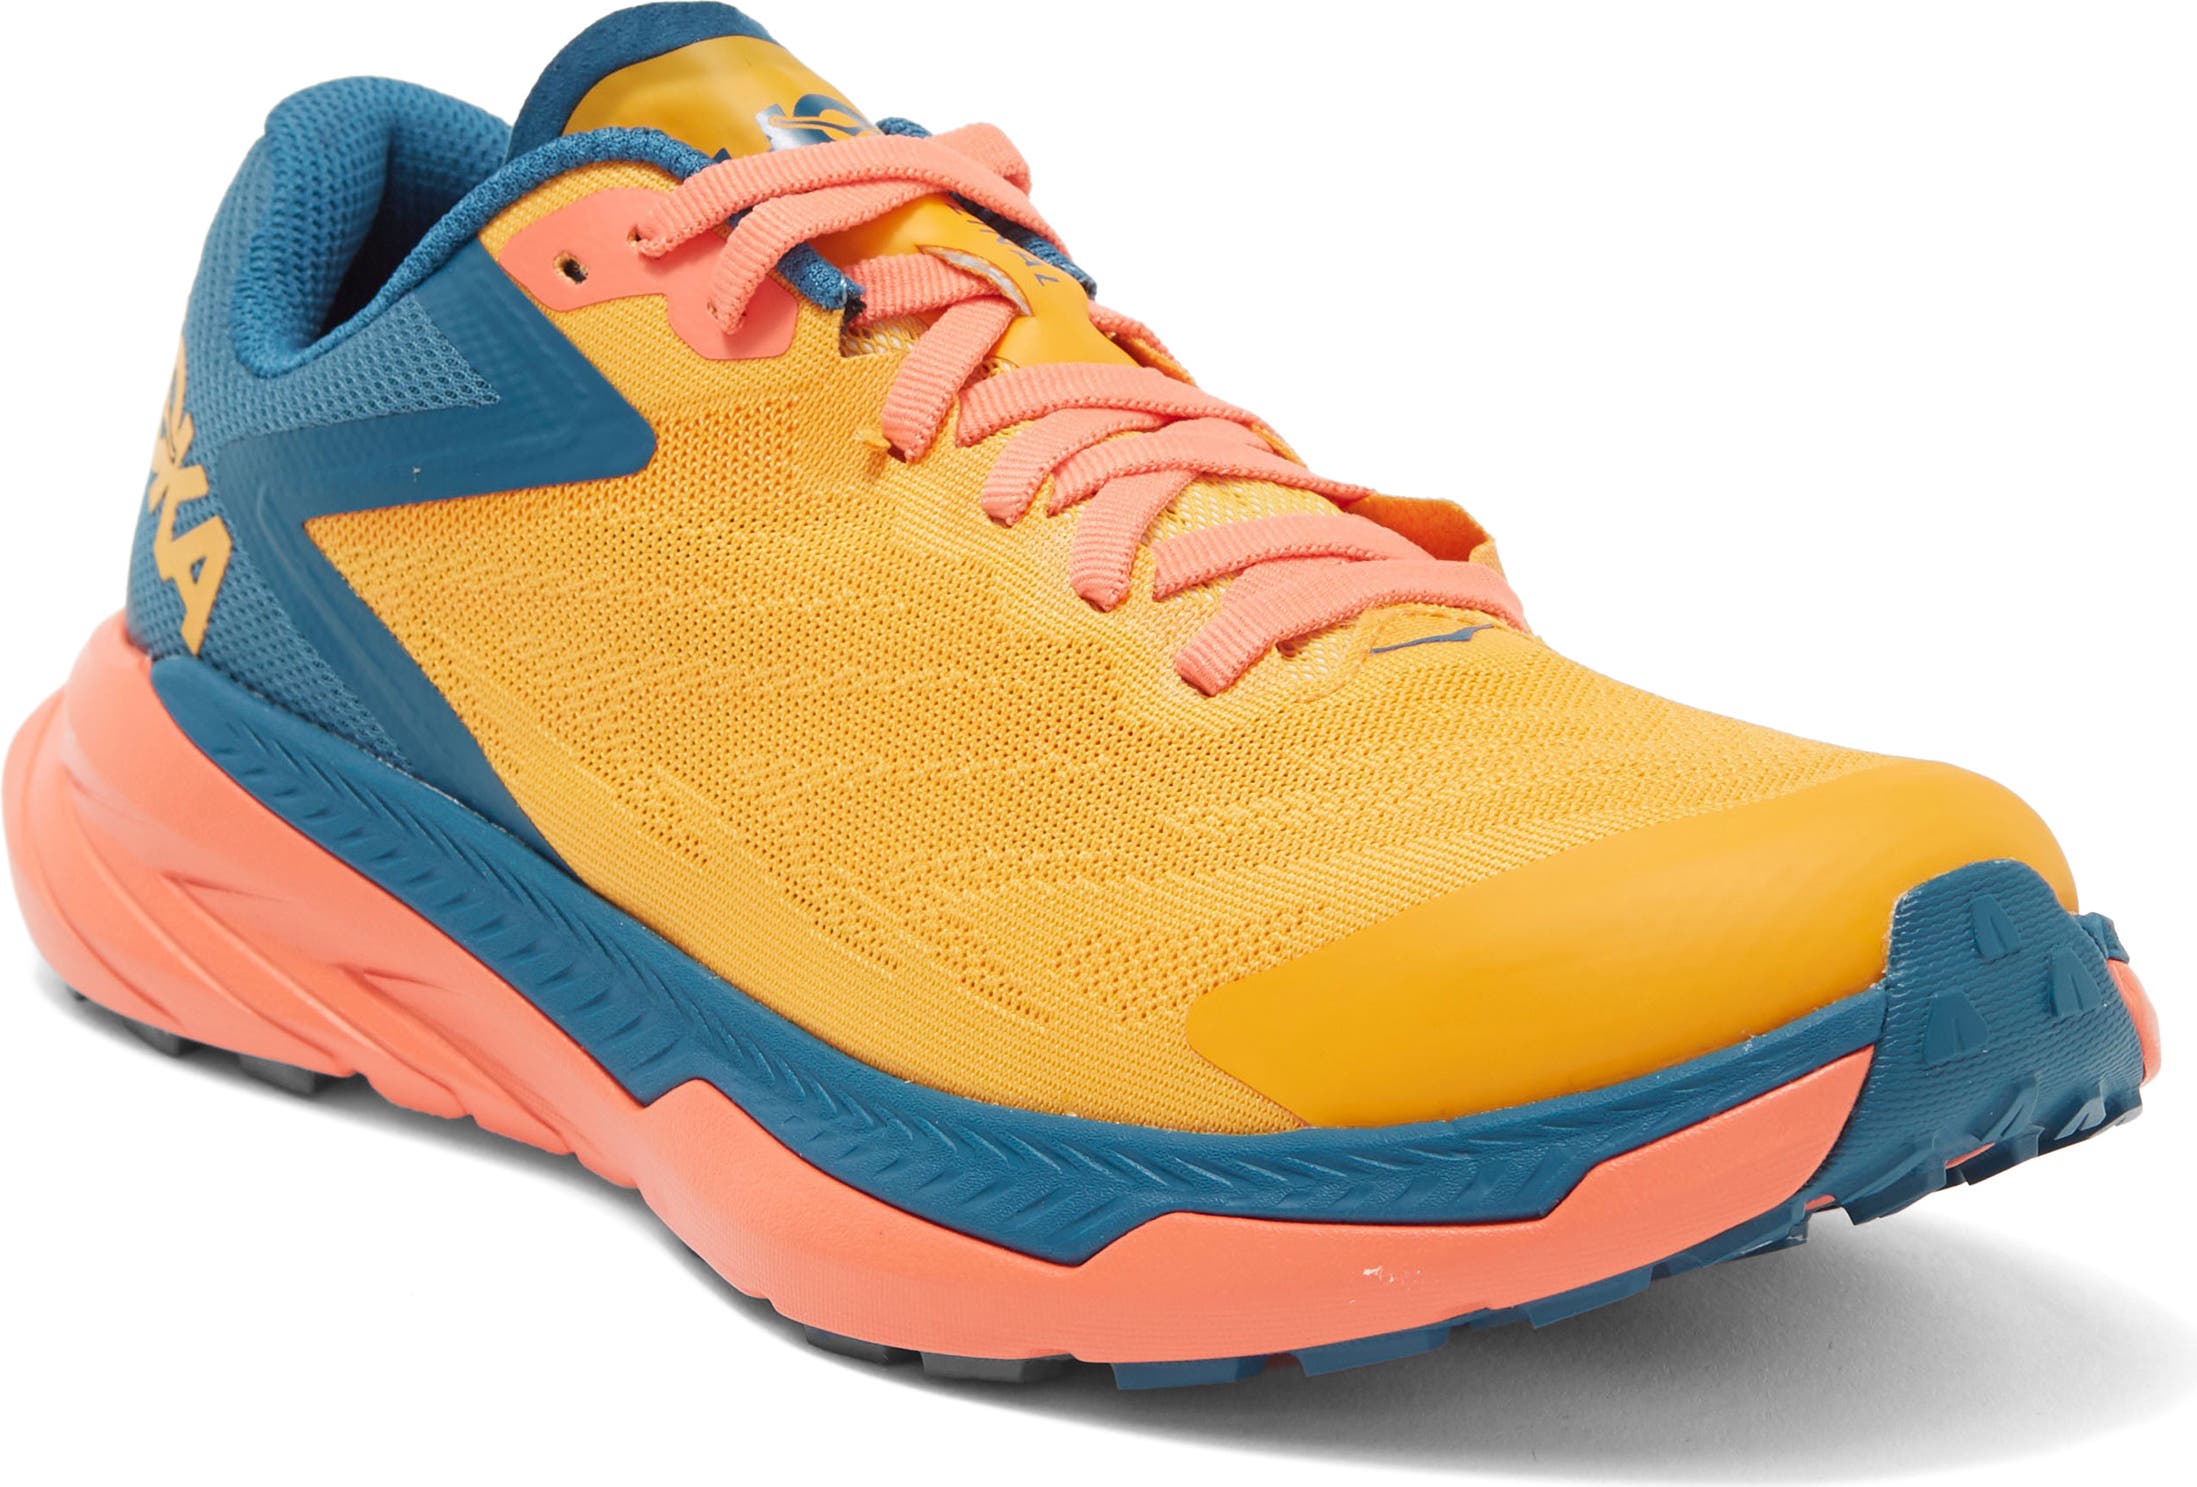 Hoka New Year Sale: Up to 51% off Shoes and Sandals Nordstrom Rack